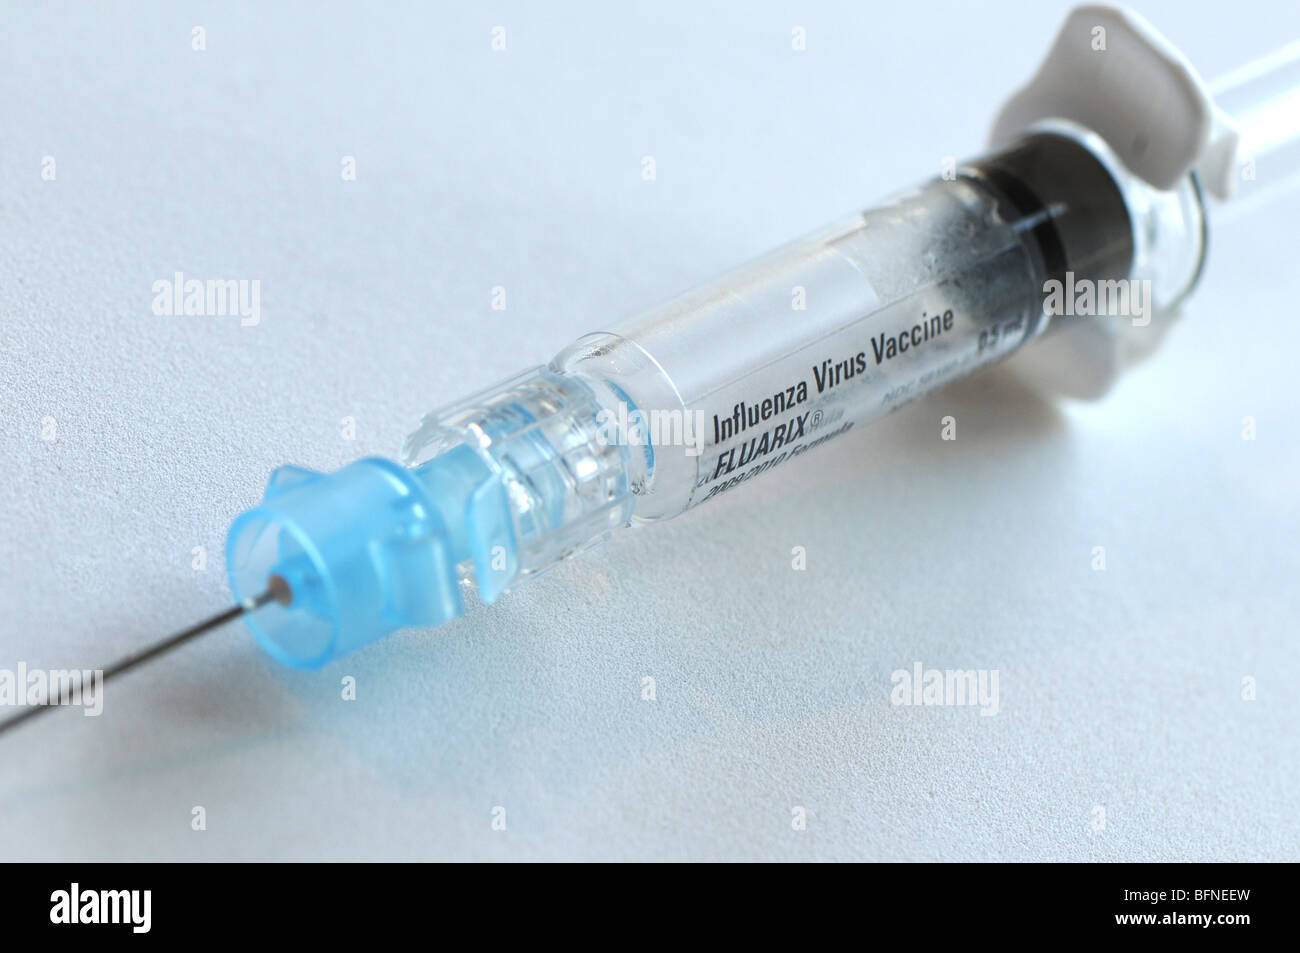 Influenza virus vaccine manufactured for the 2009/2010 flu season.  The brand name of this preparation is Fluarix Stock Photo